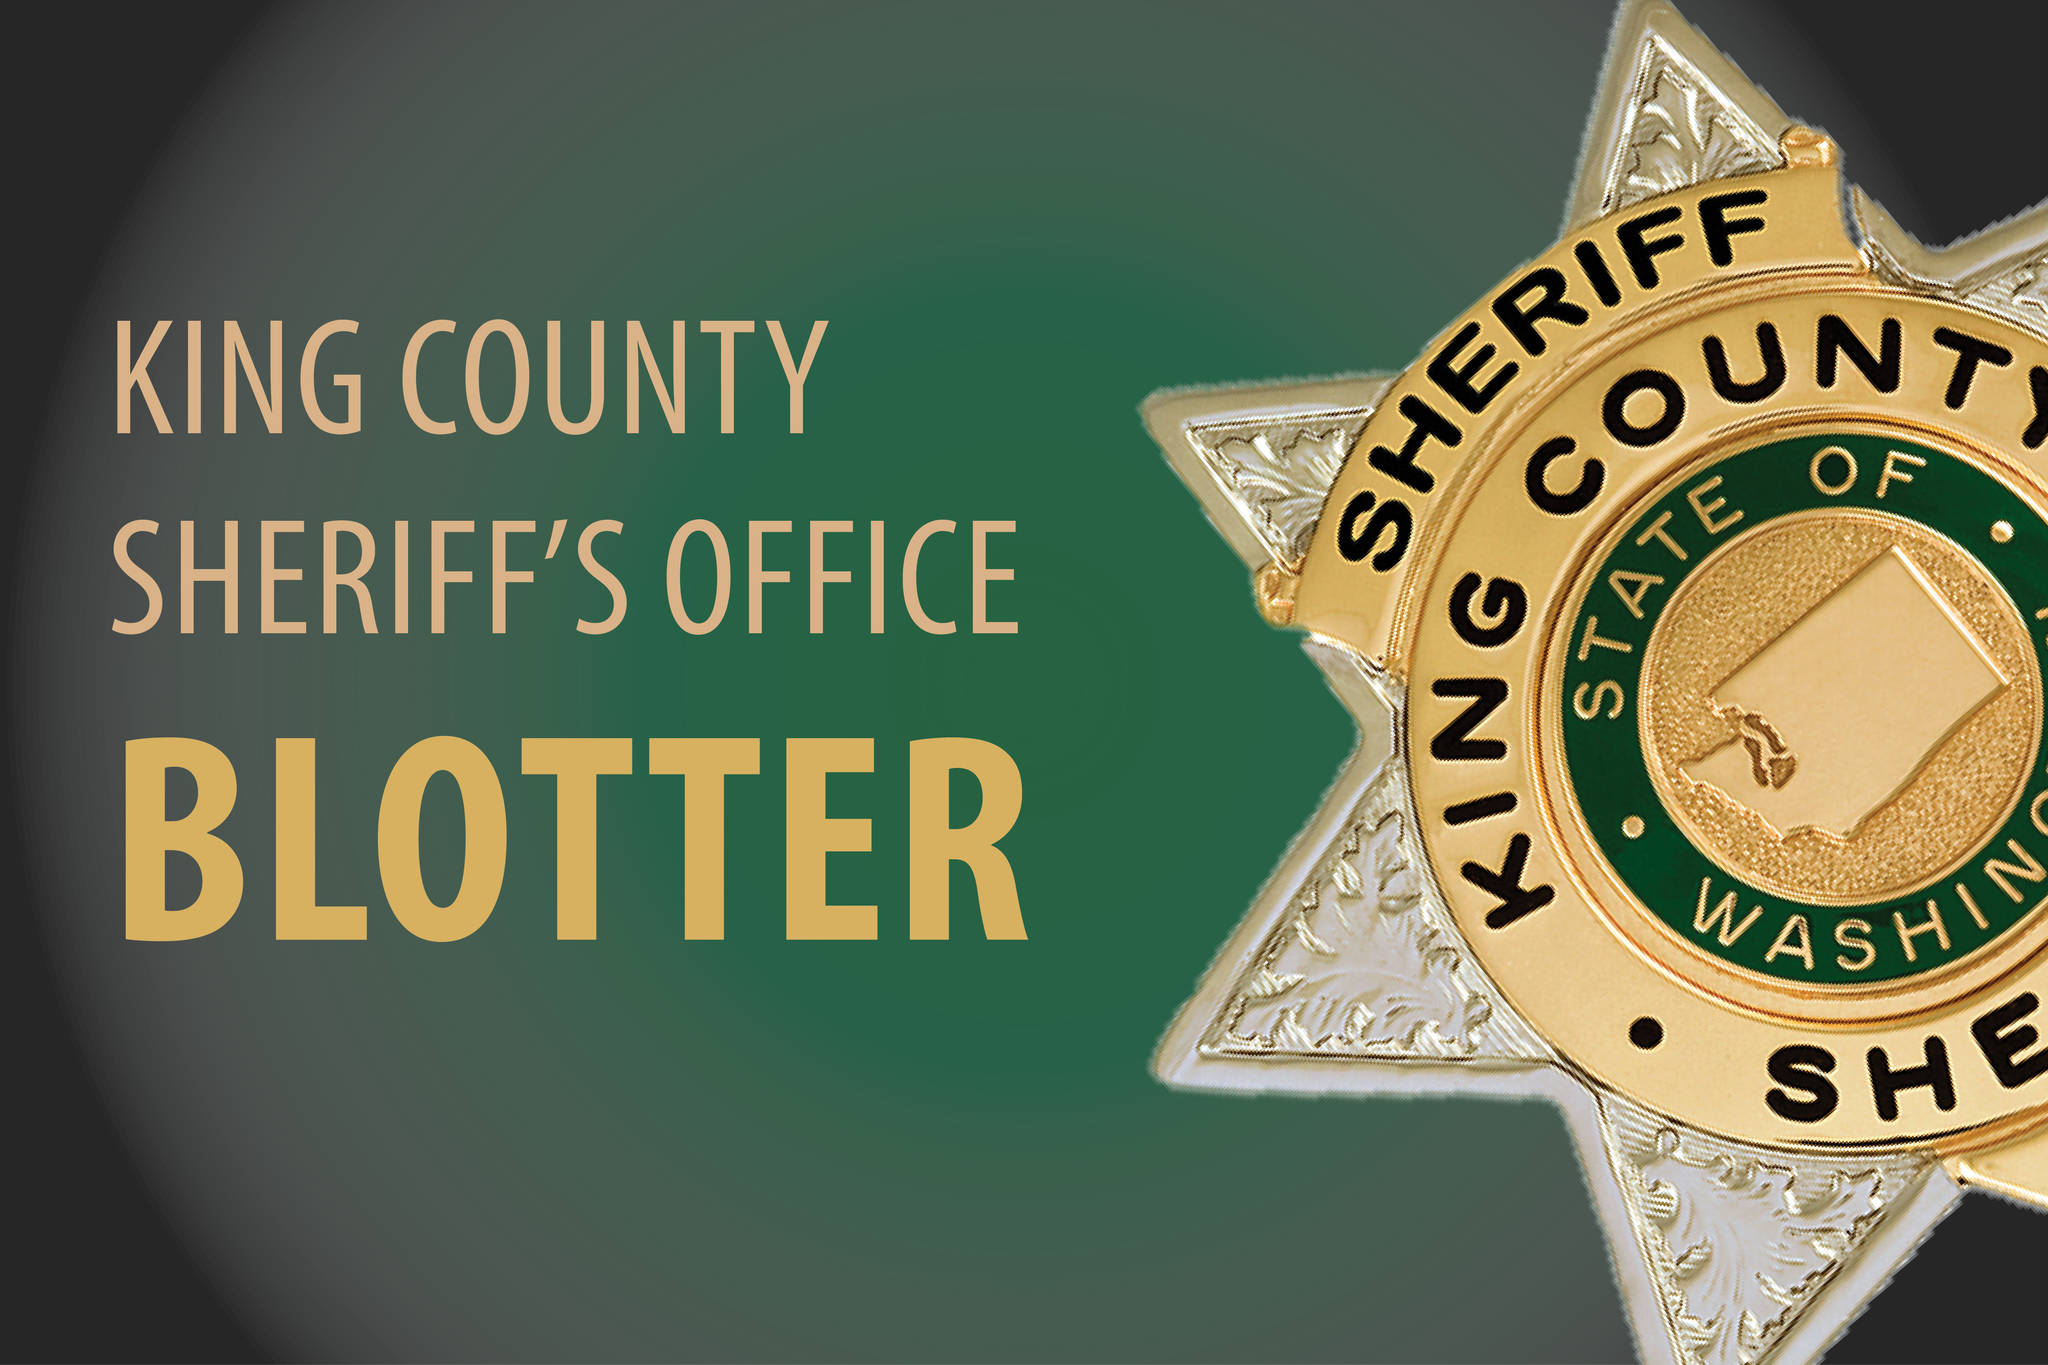 Driver claims to be “sovereign citizen” | KCSO BLOTTER